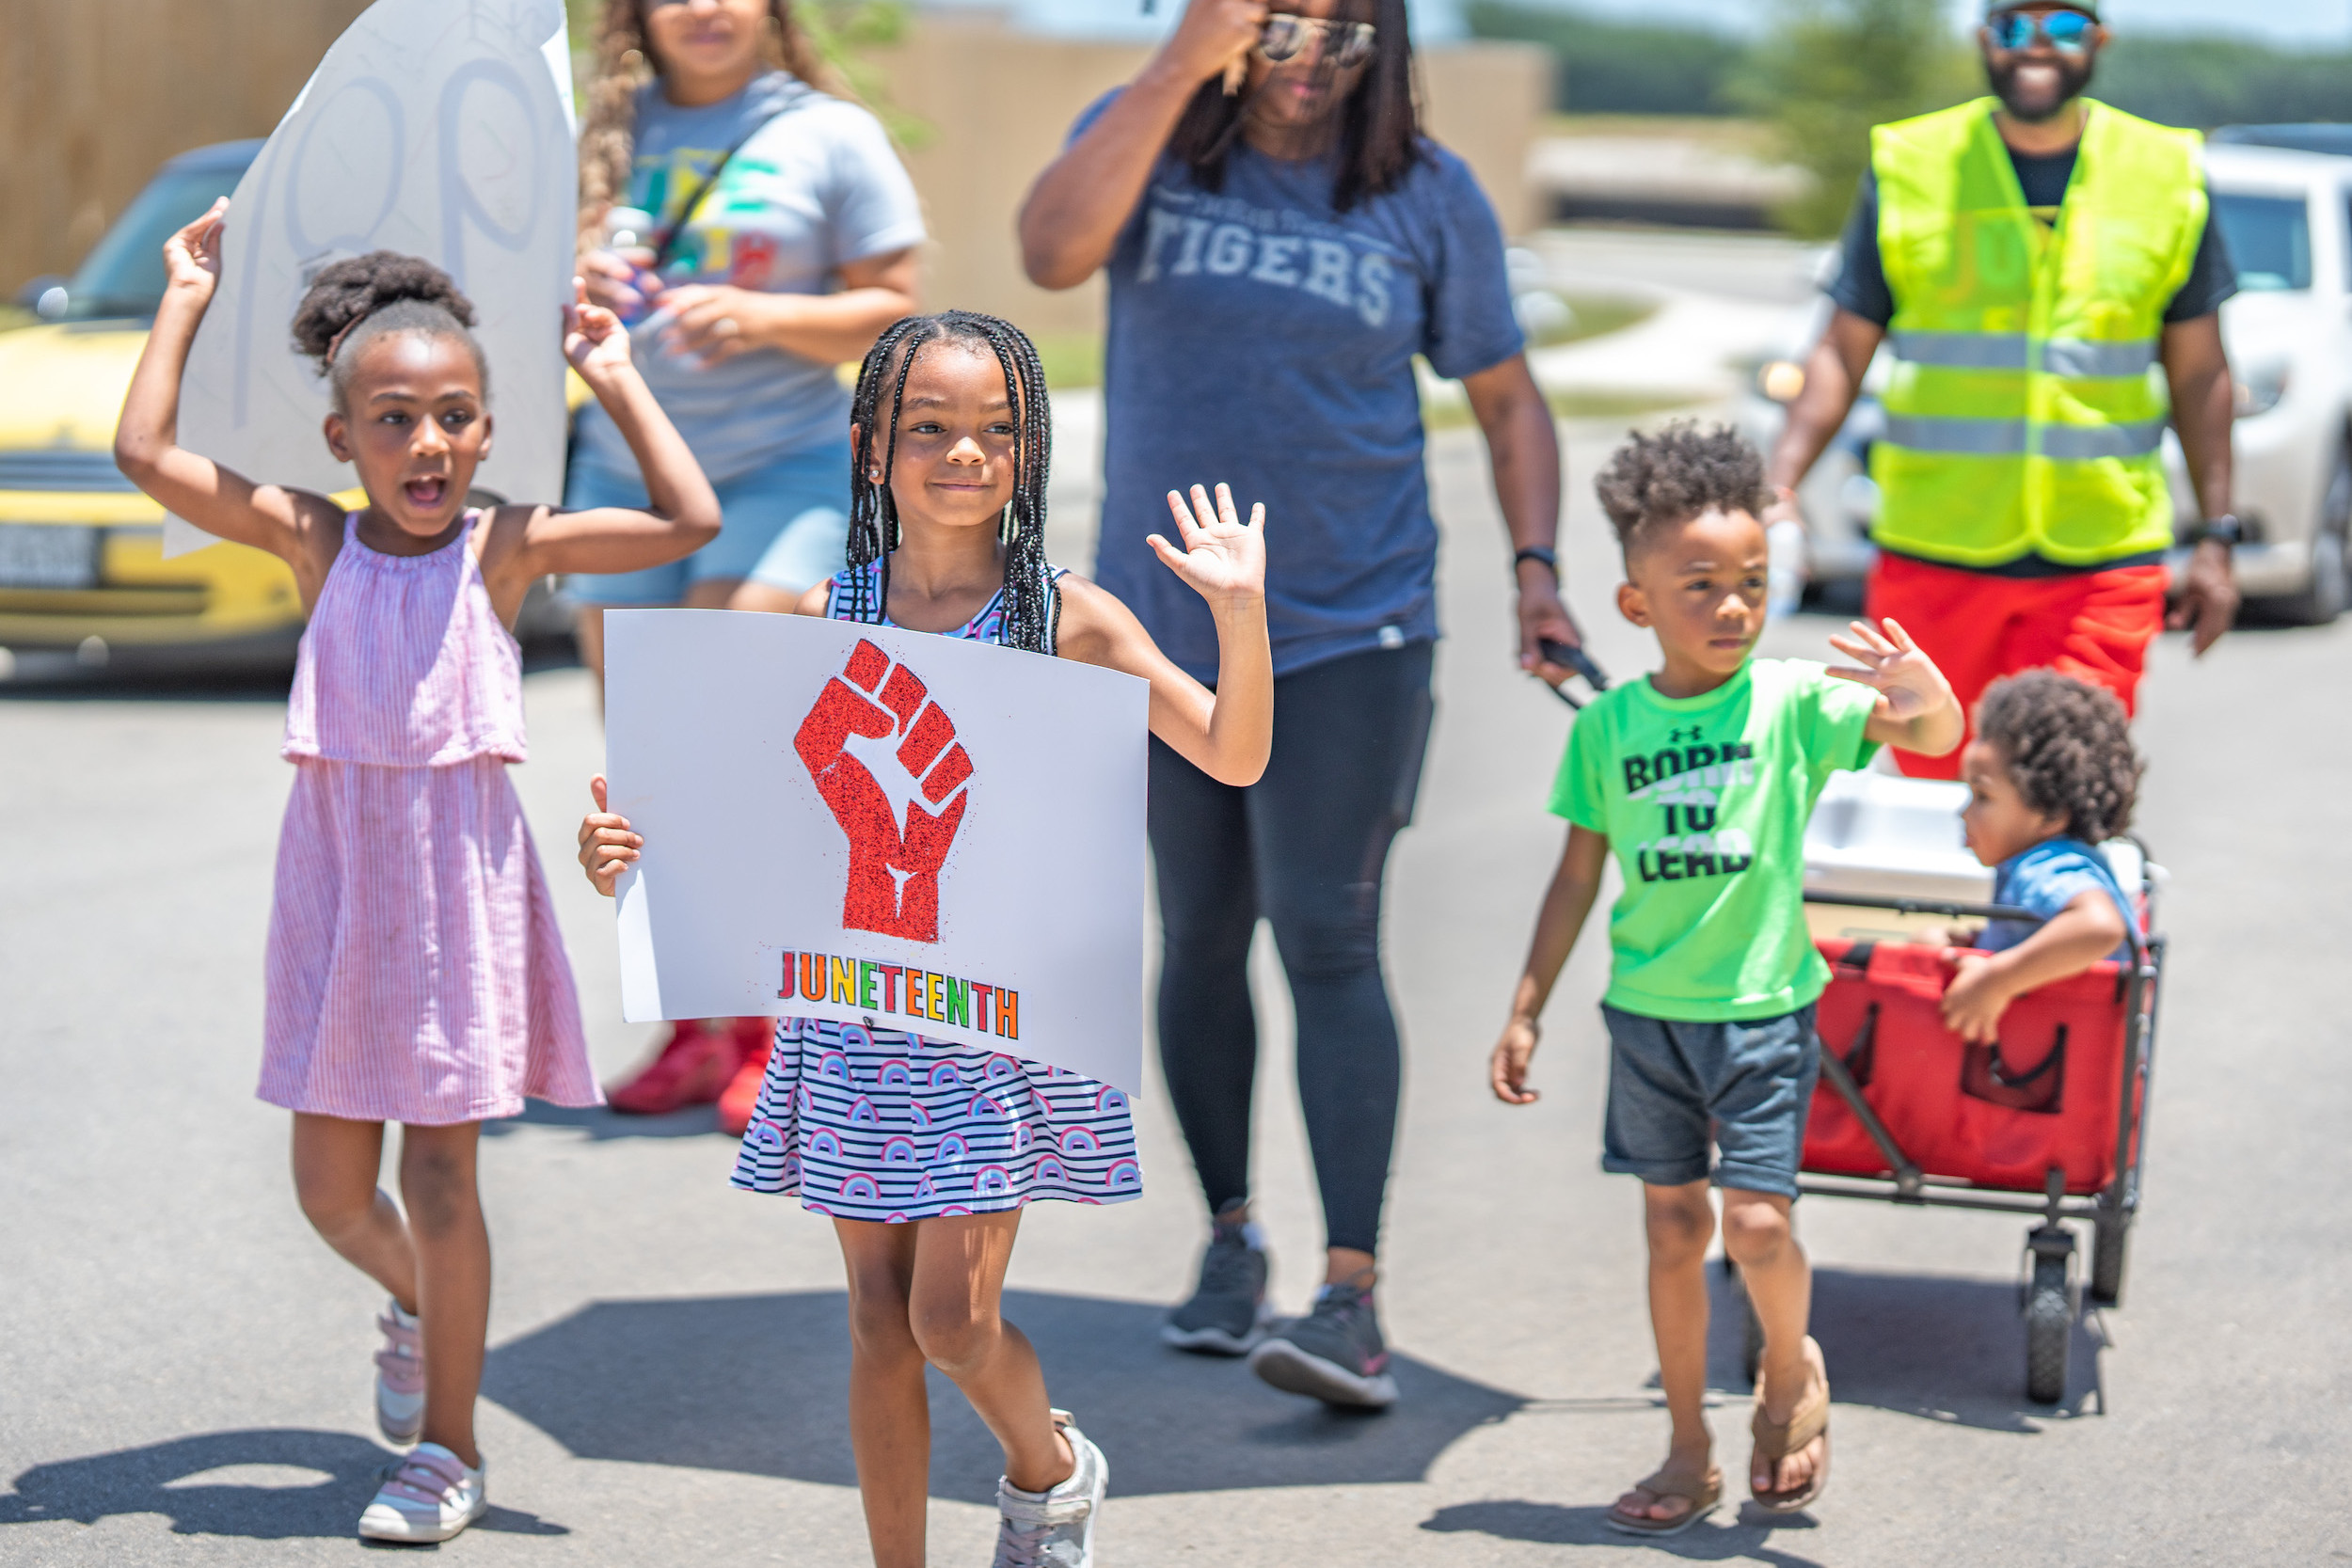 Photo of children holding Juneteenth signs in a parade.